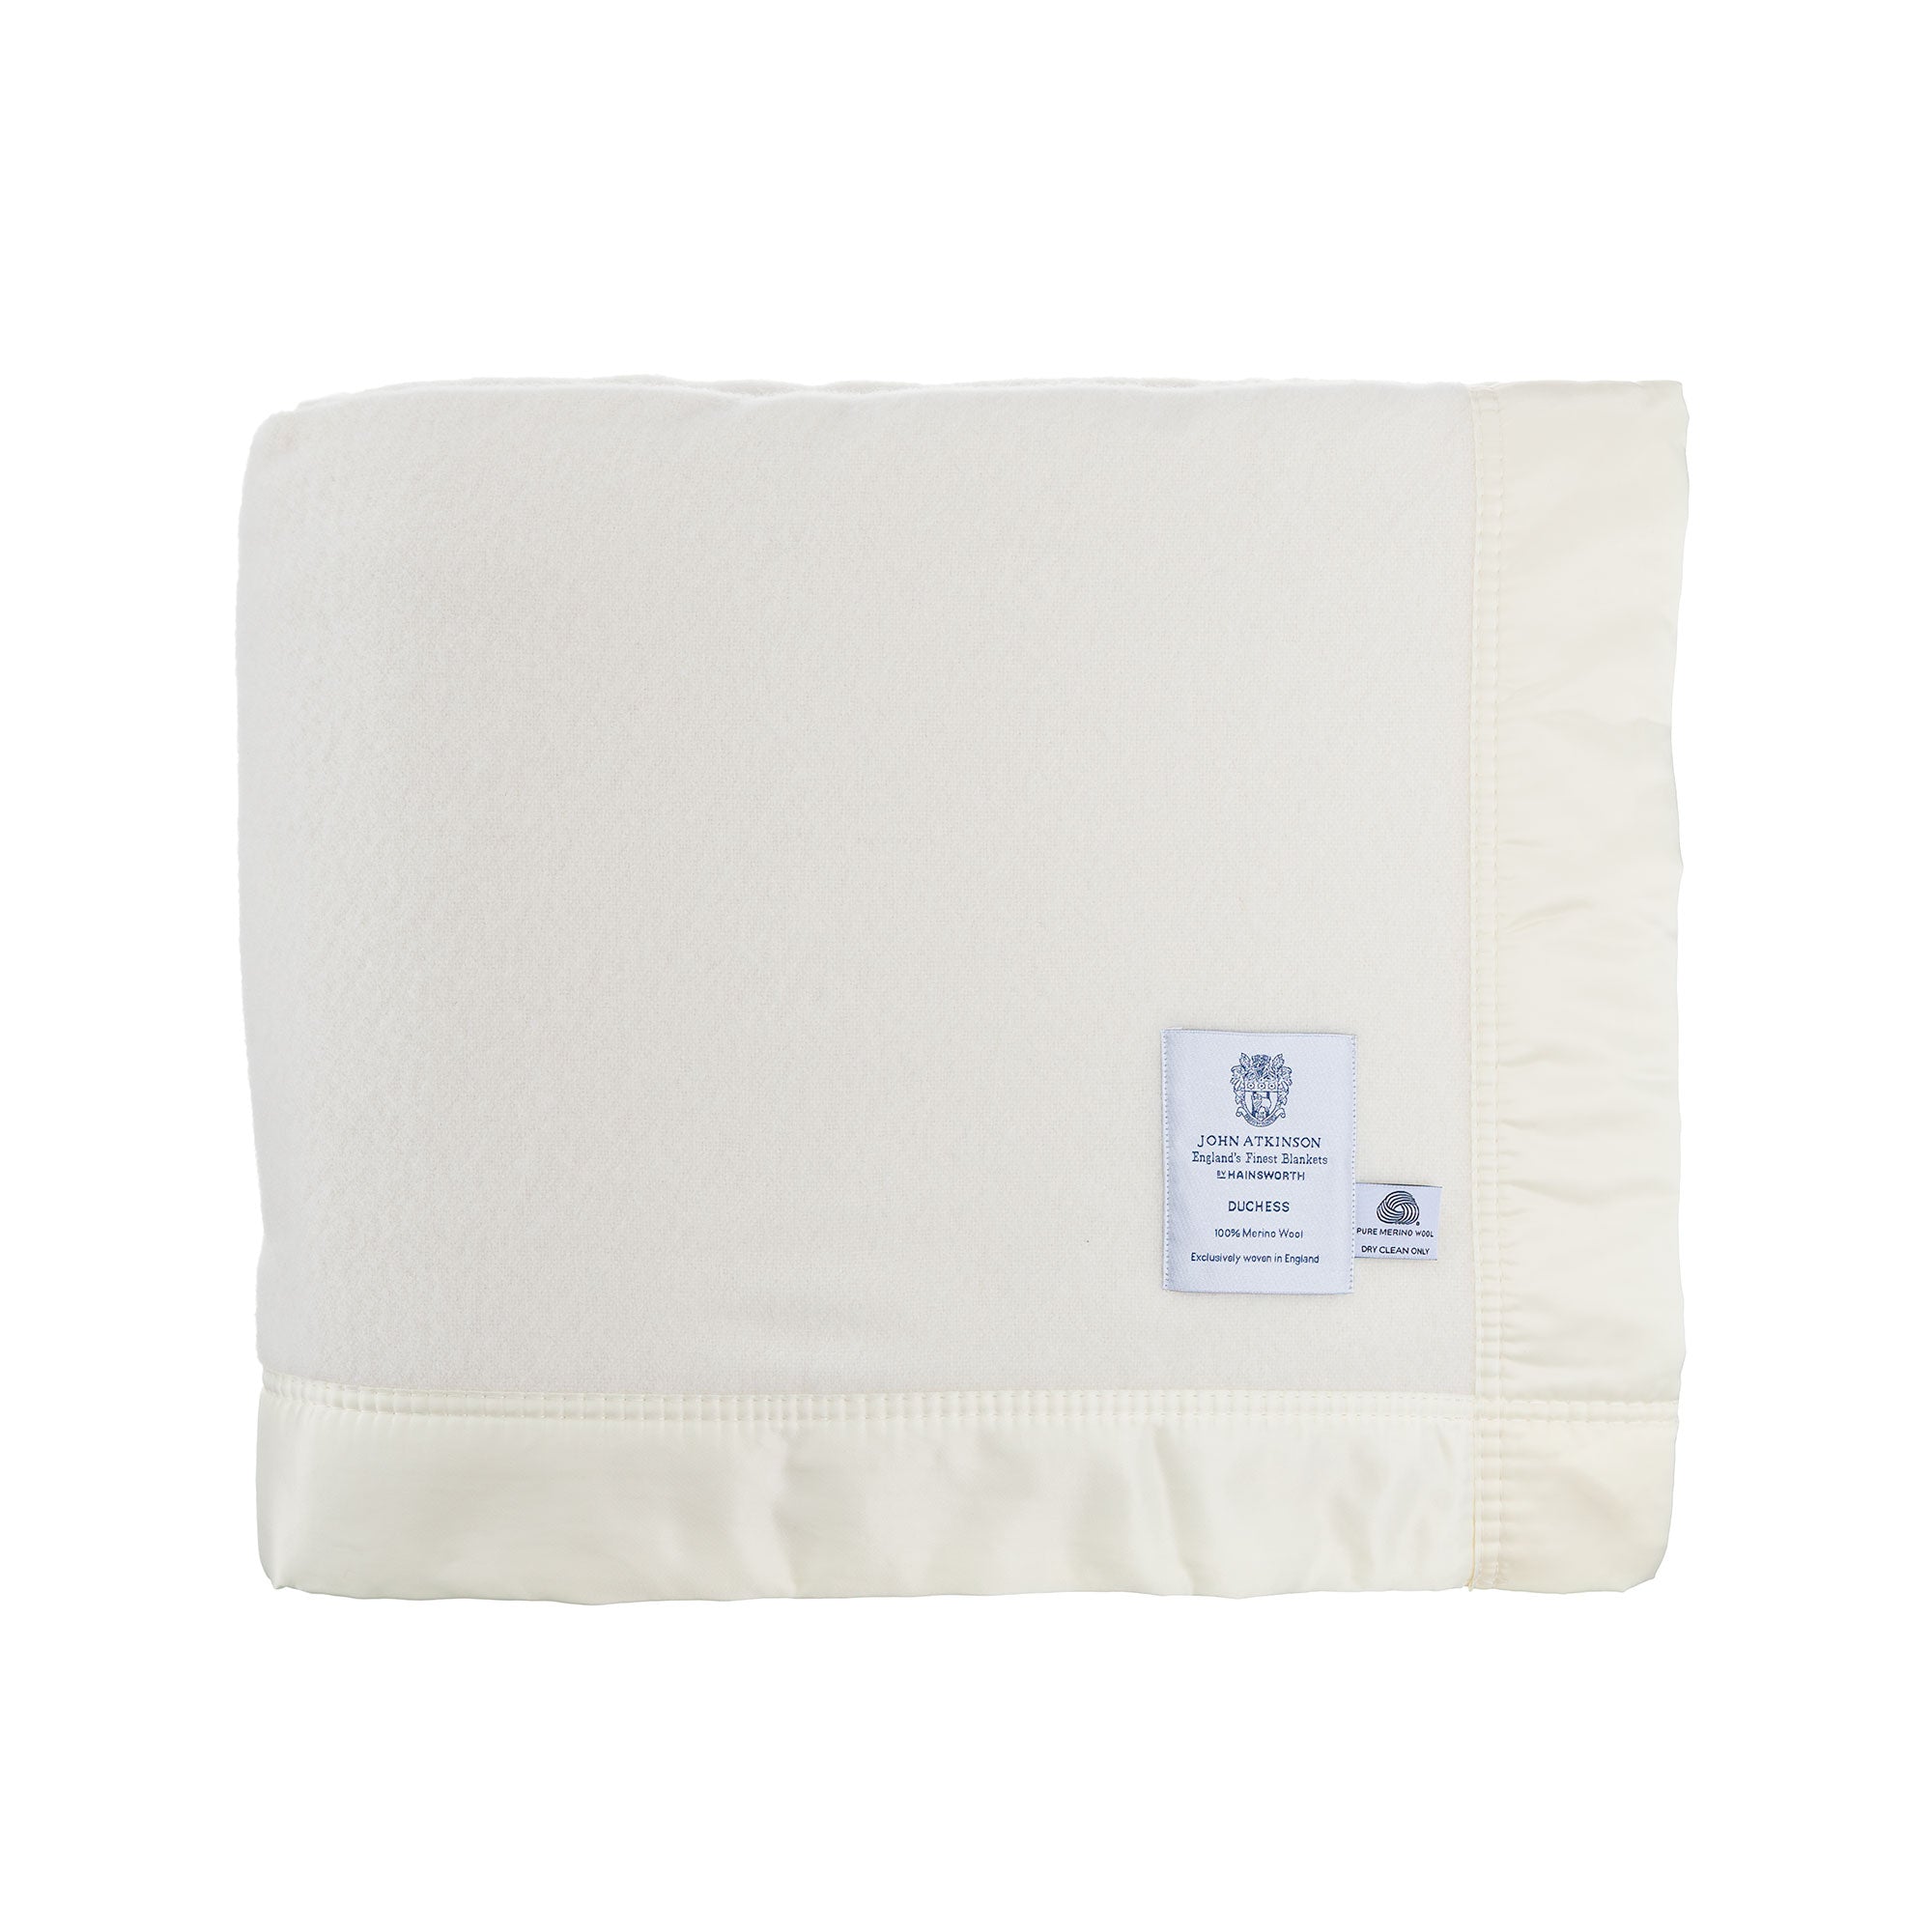 Merino Wool Bed Blankets | Satin Bound | The Wool Company